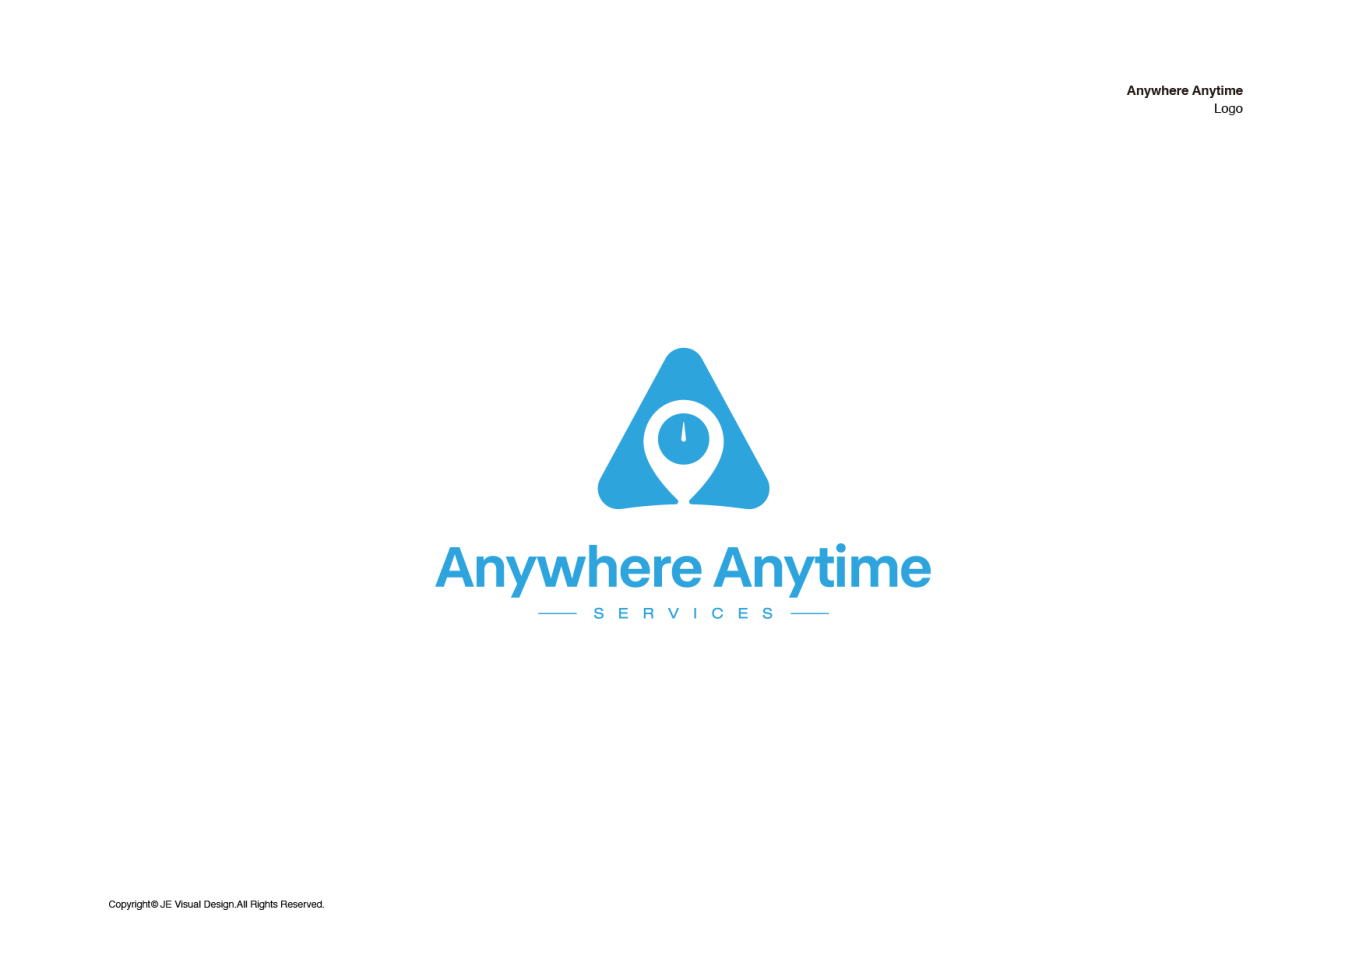 Anywhere Anytime logo设计图4